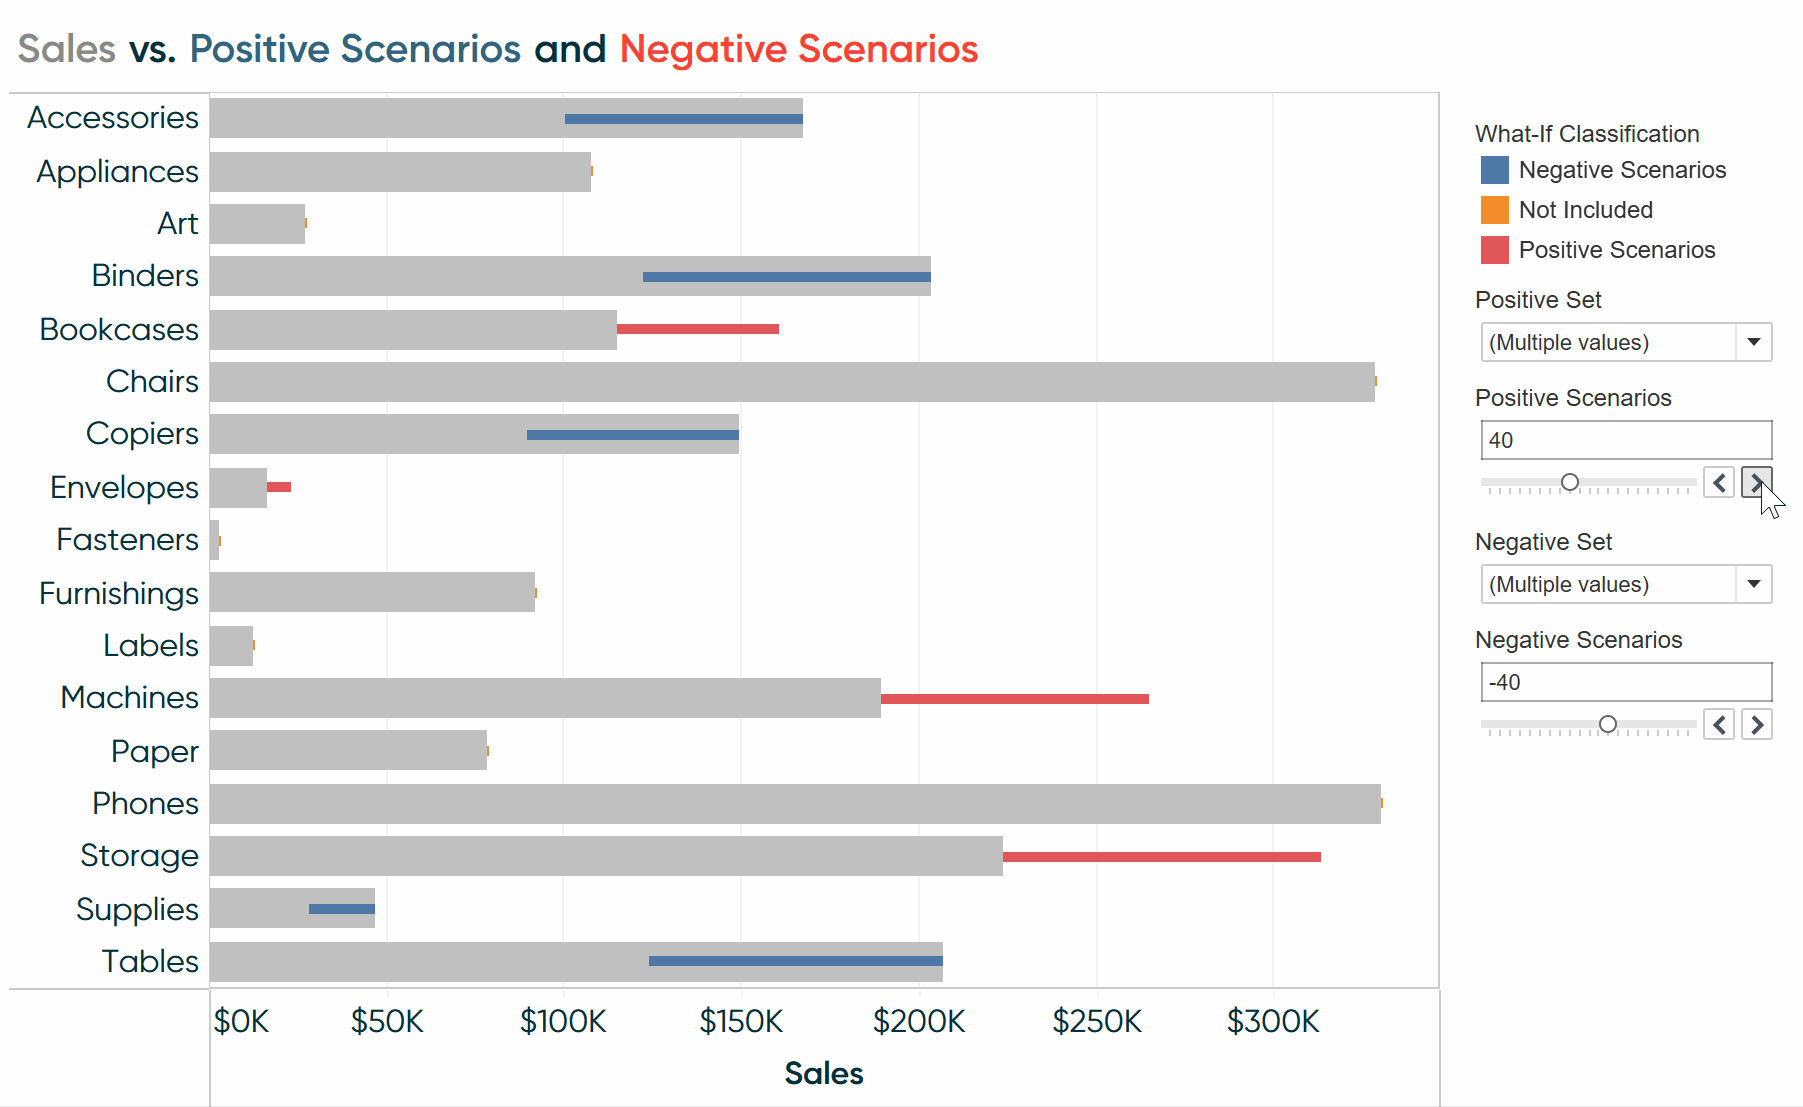 https://playfairdata.com/wp-content/uploads/2022/05/How-to-Do-Better-What-If-Scenario-Planning-with-Tableau-Set-Controls.gif